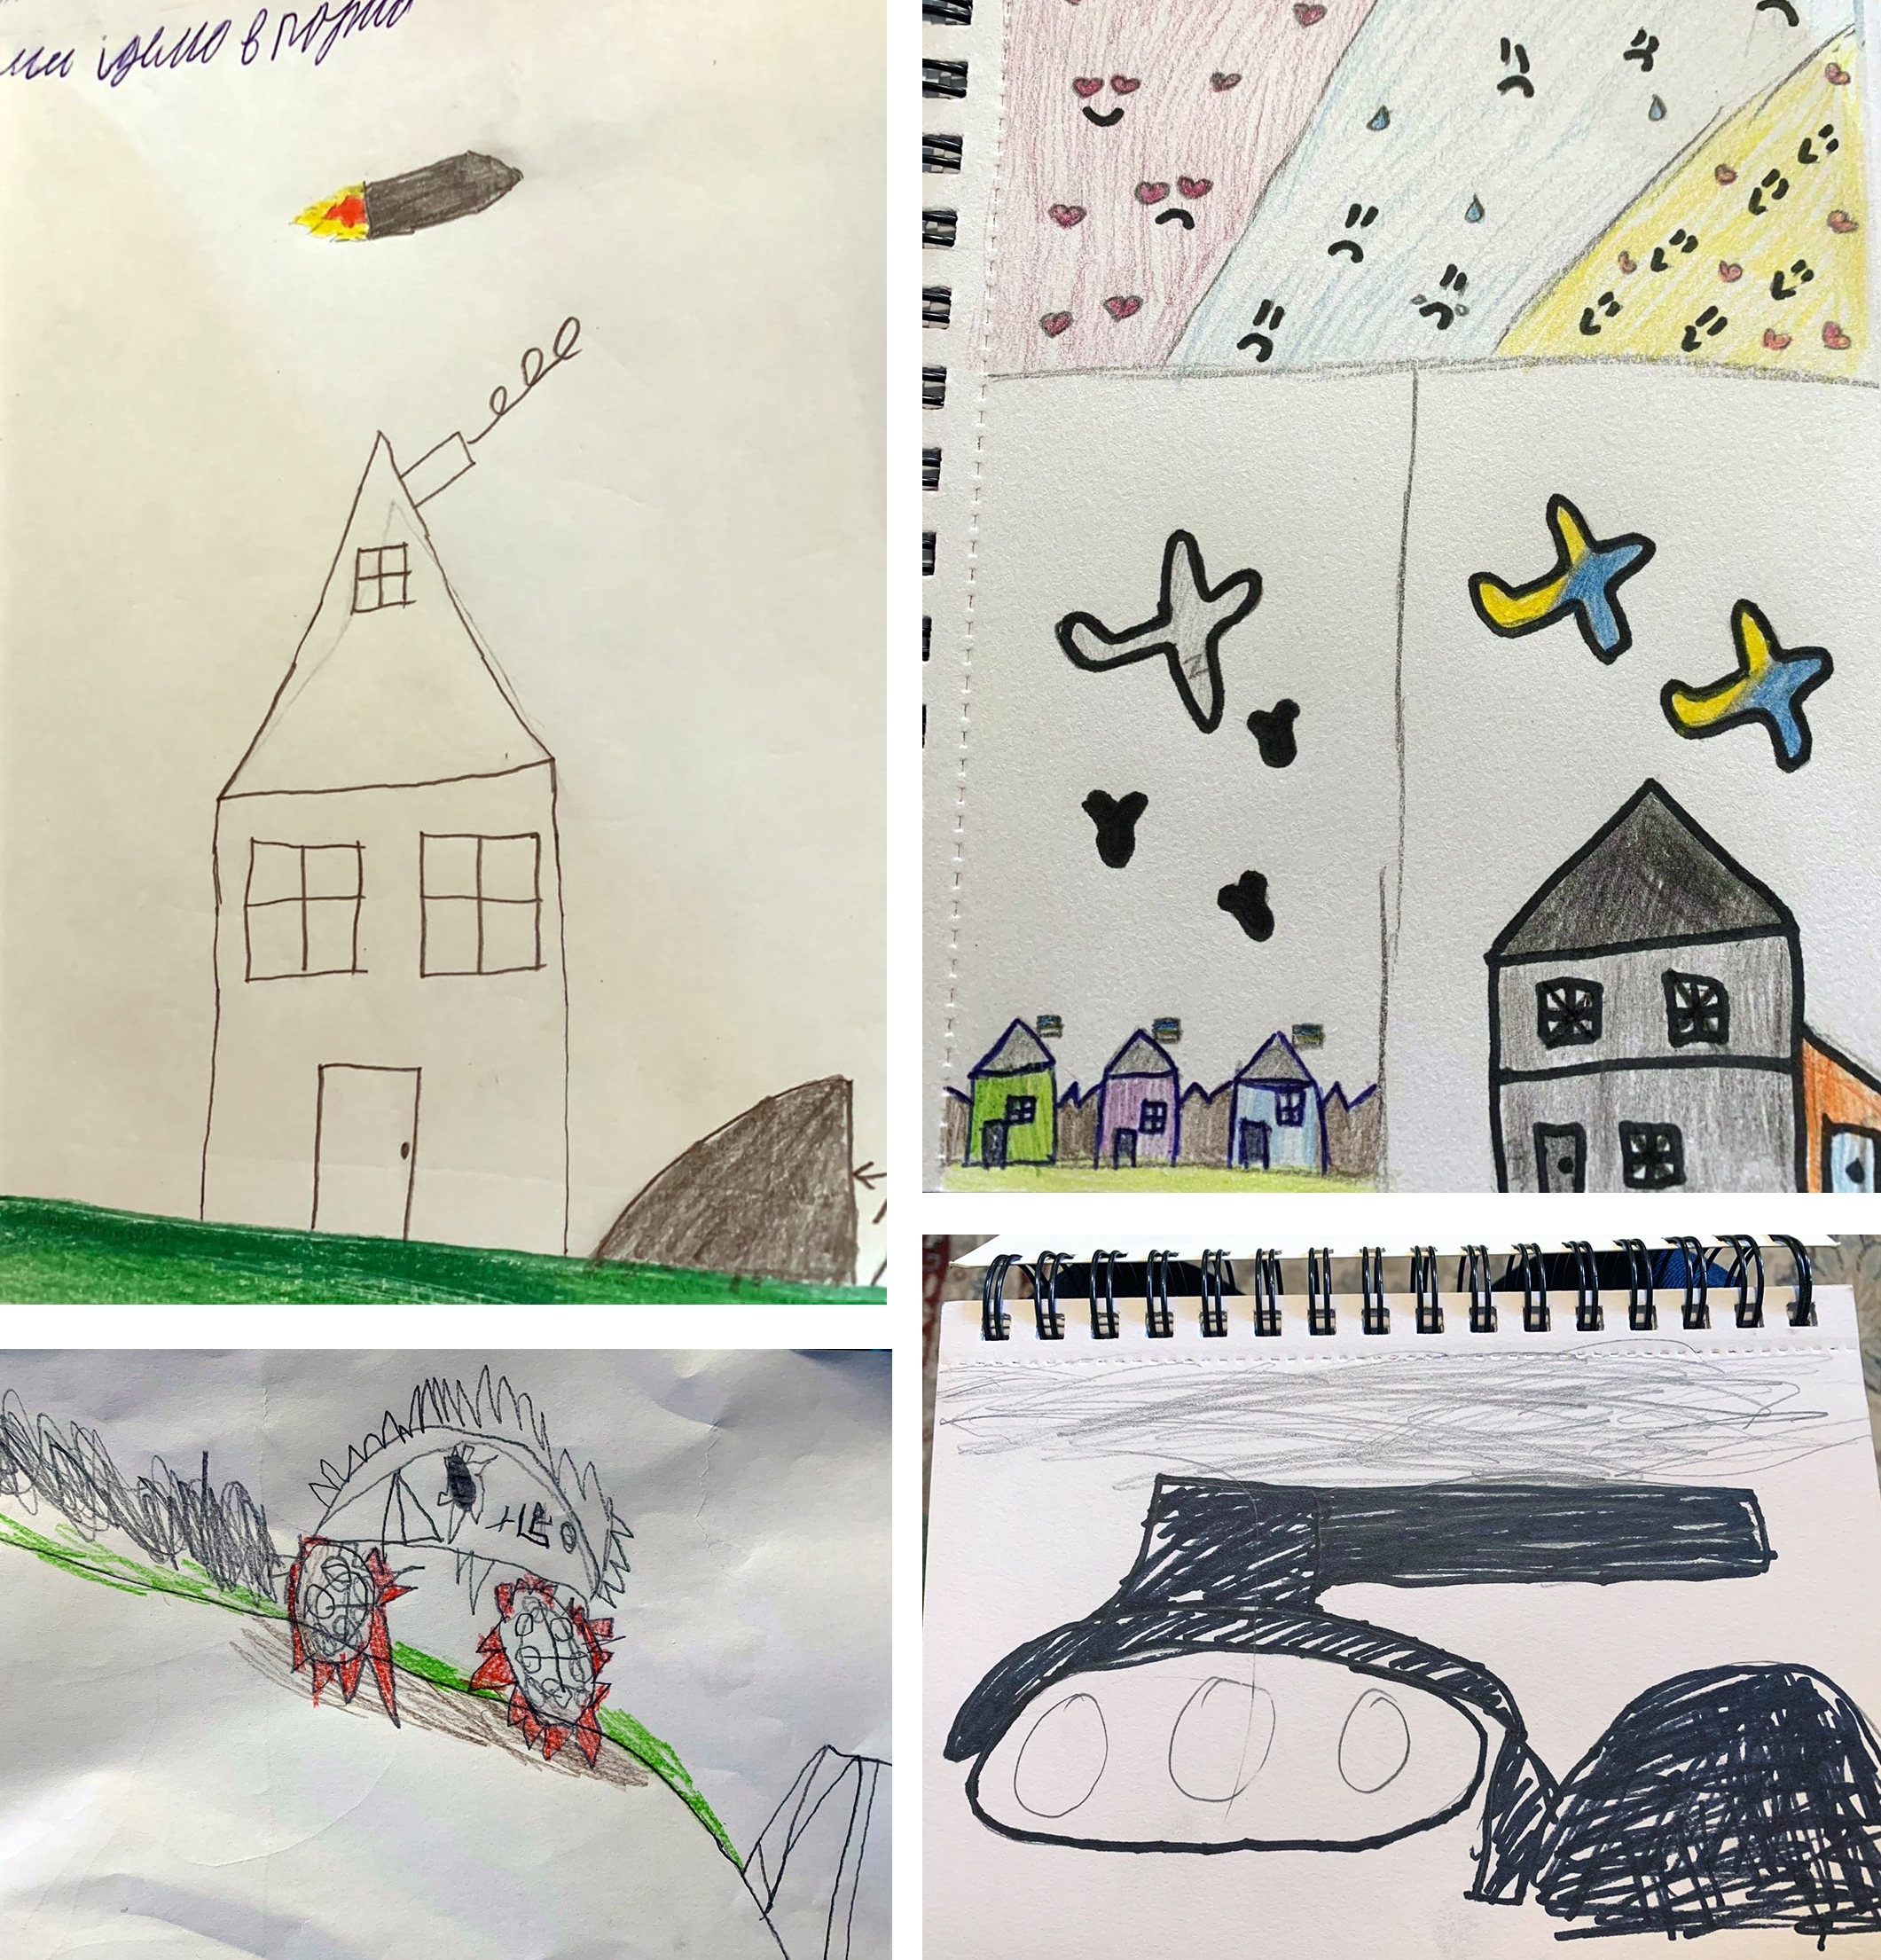 Drawings by the Ukrainian children show their scariest moments.